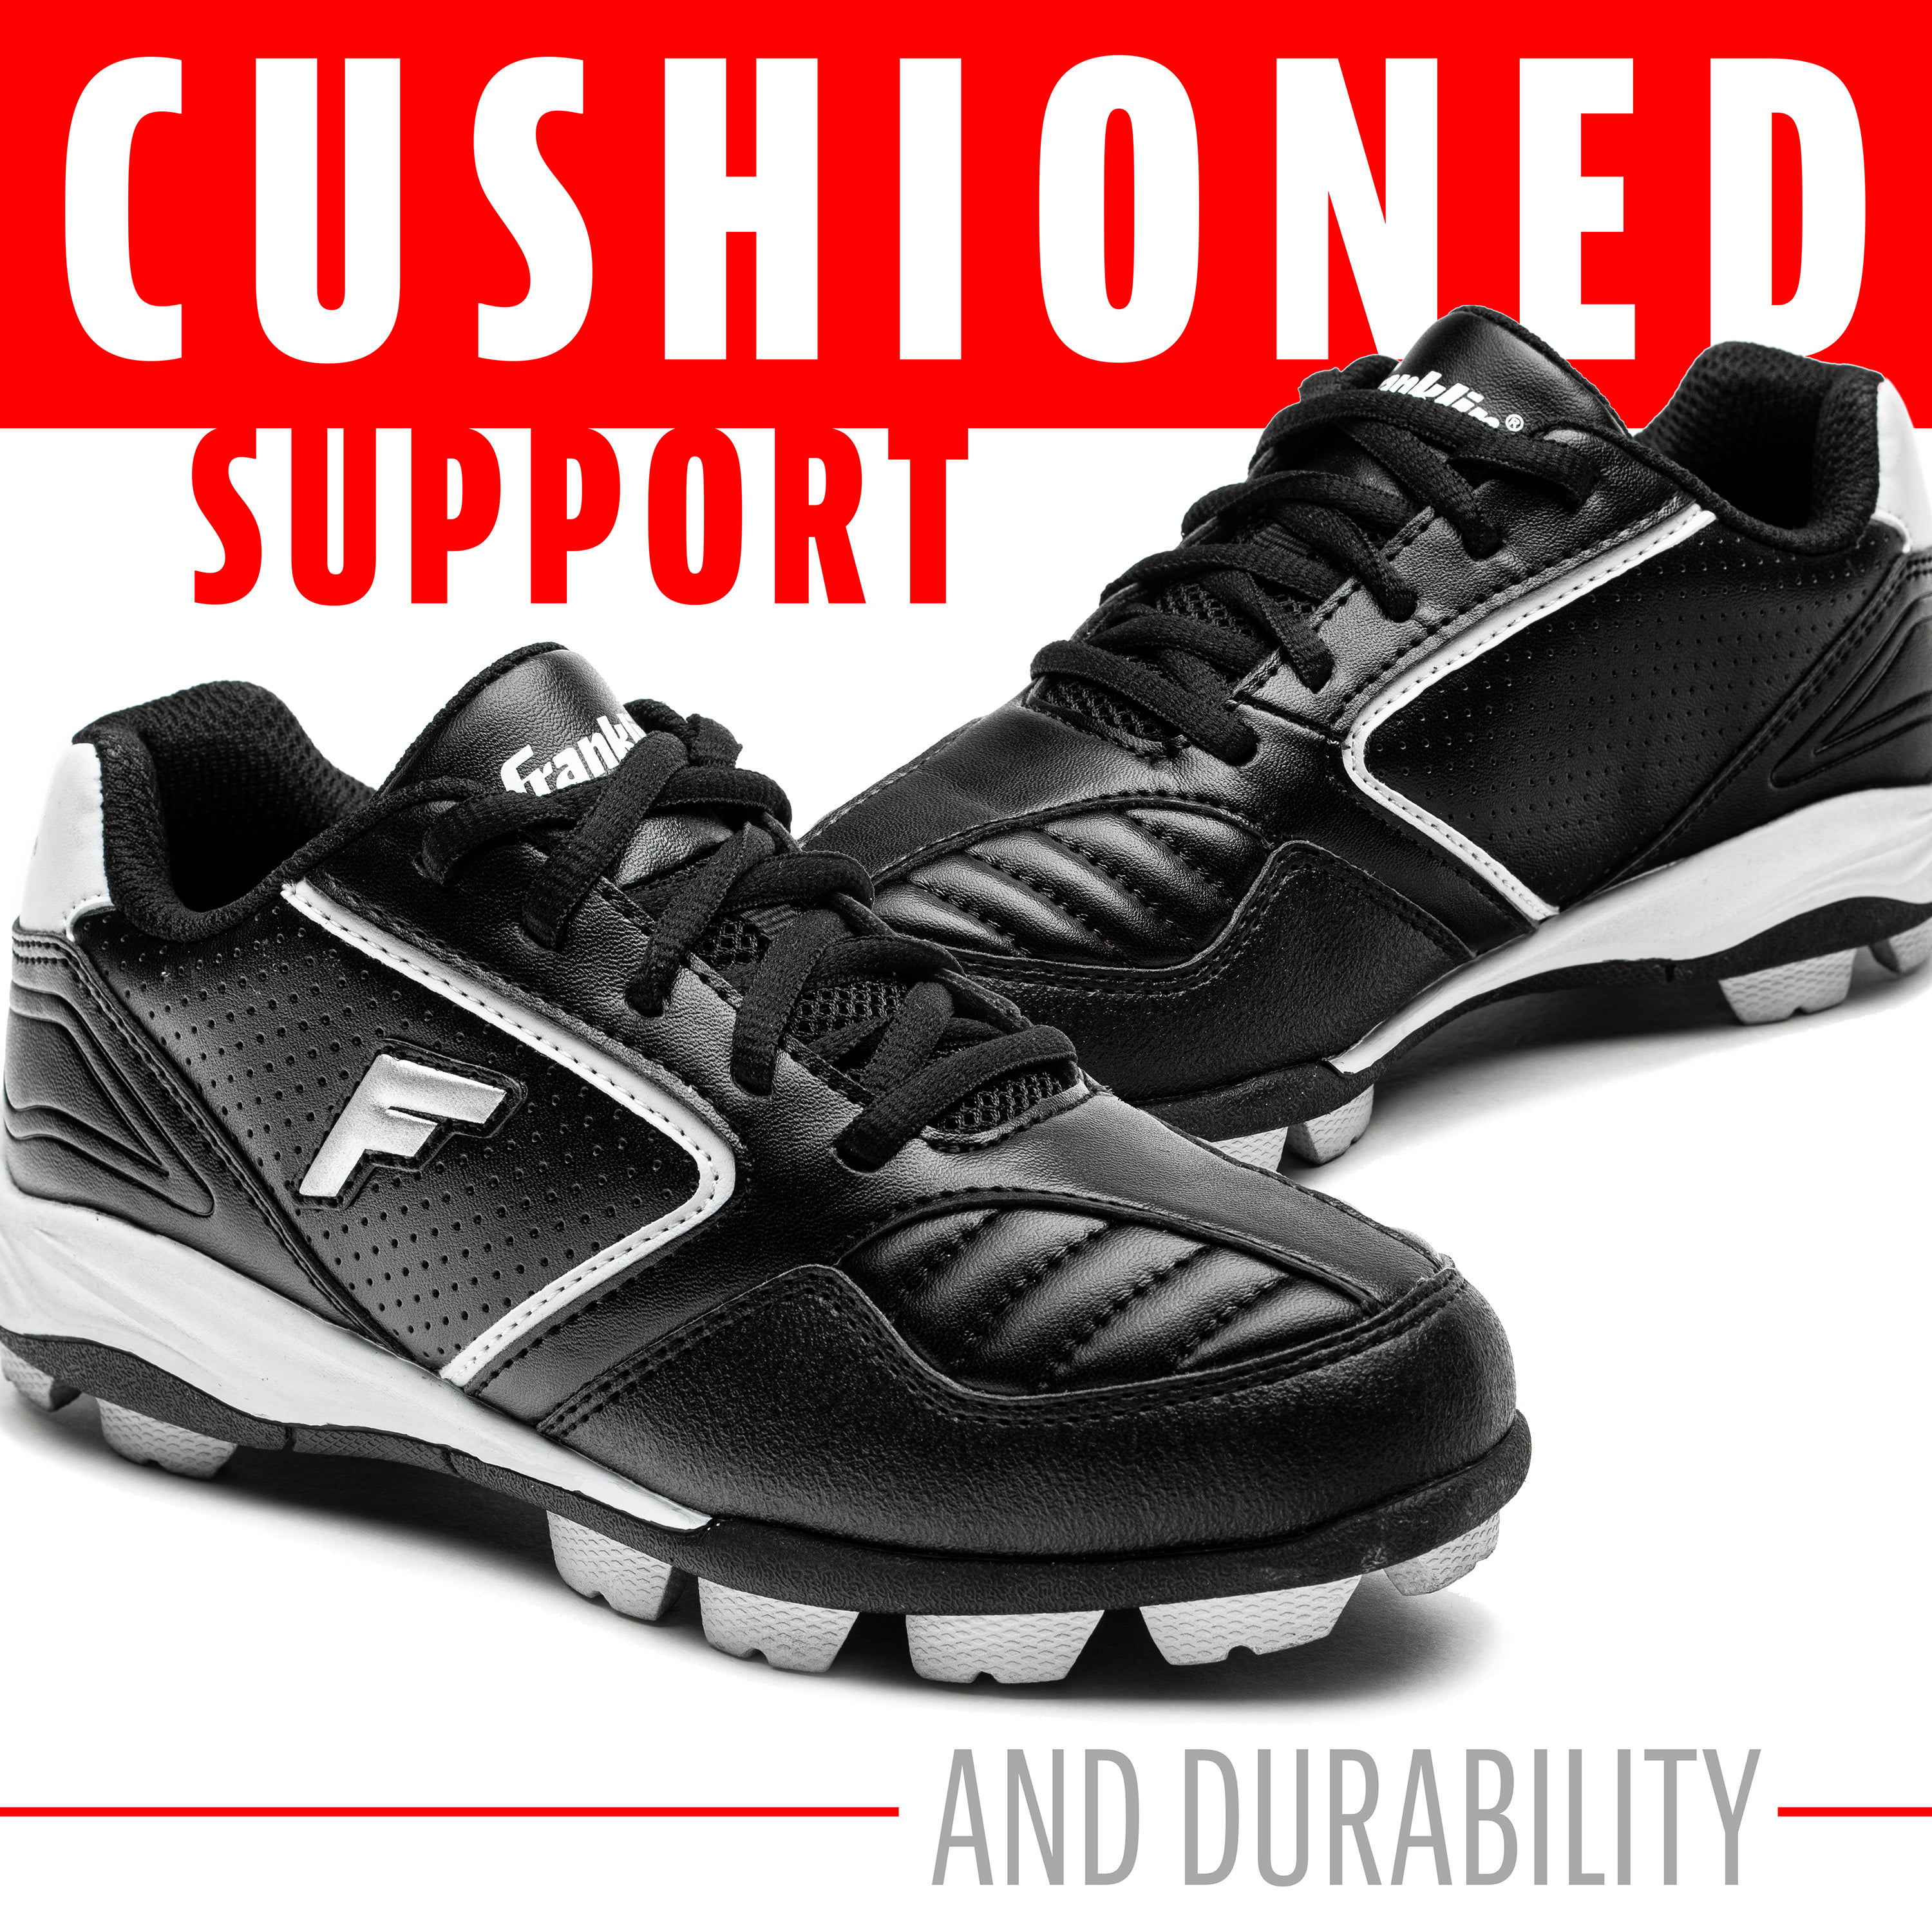 C1 for sale online Franklin Sports Youth Baseball Cleats Size 12